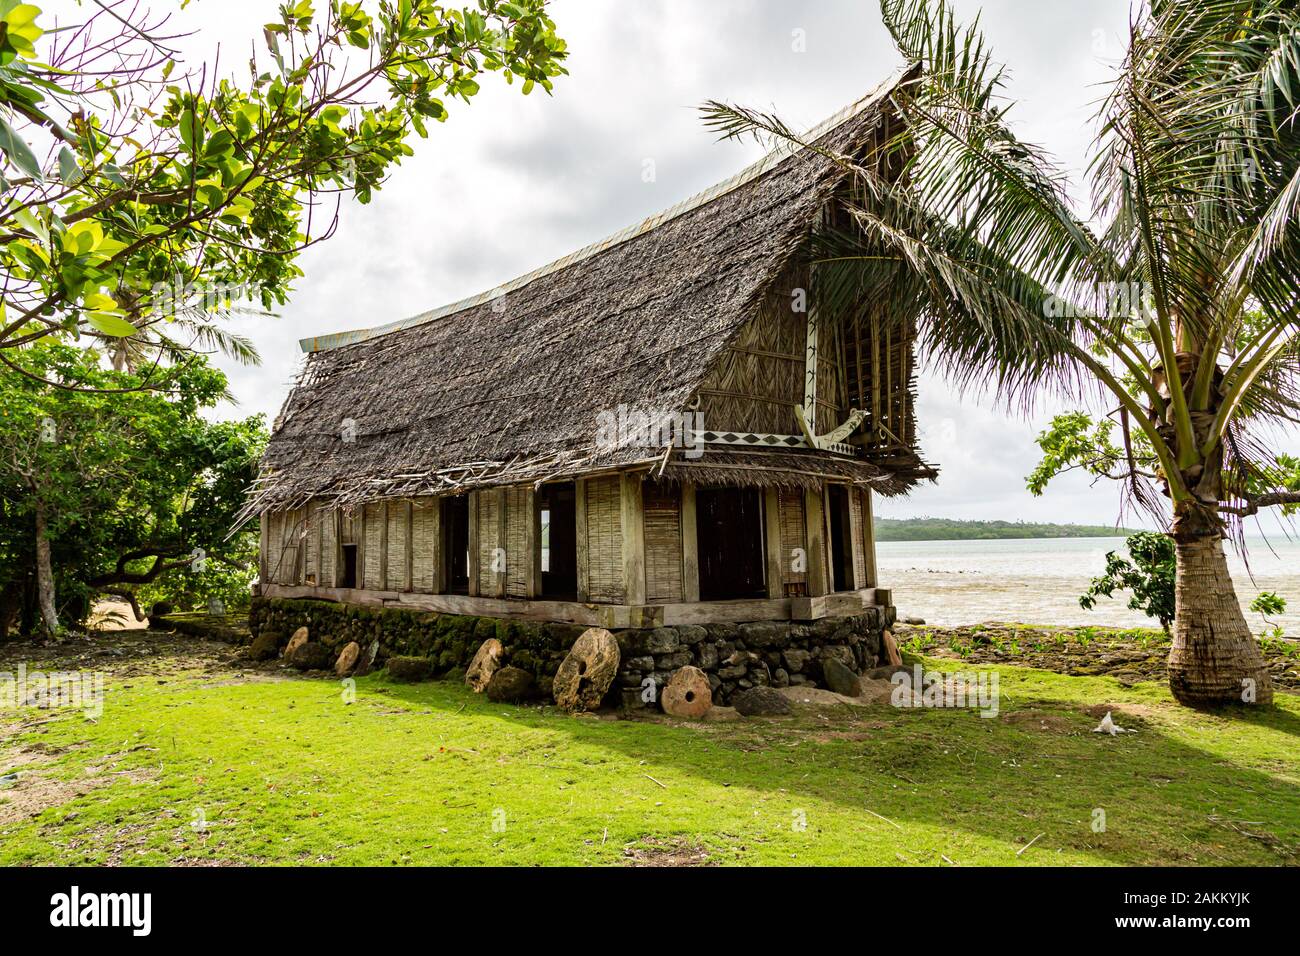 Old traditional thatched yapese men's meeting house faluw or fale, on an elevated limestone platform with bank of rai stone money. Shore of South Paci Stock Photo